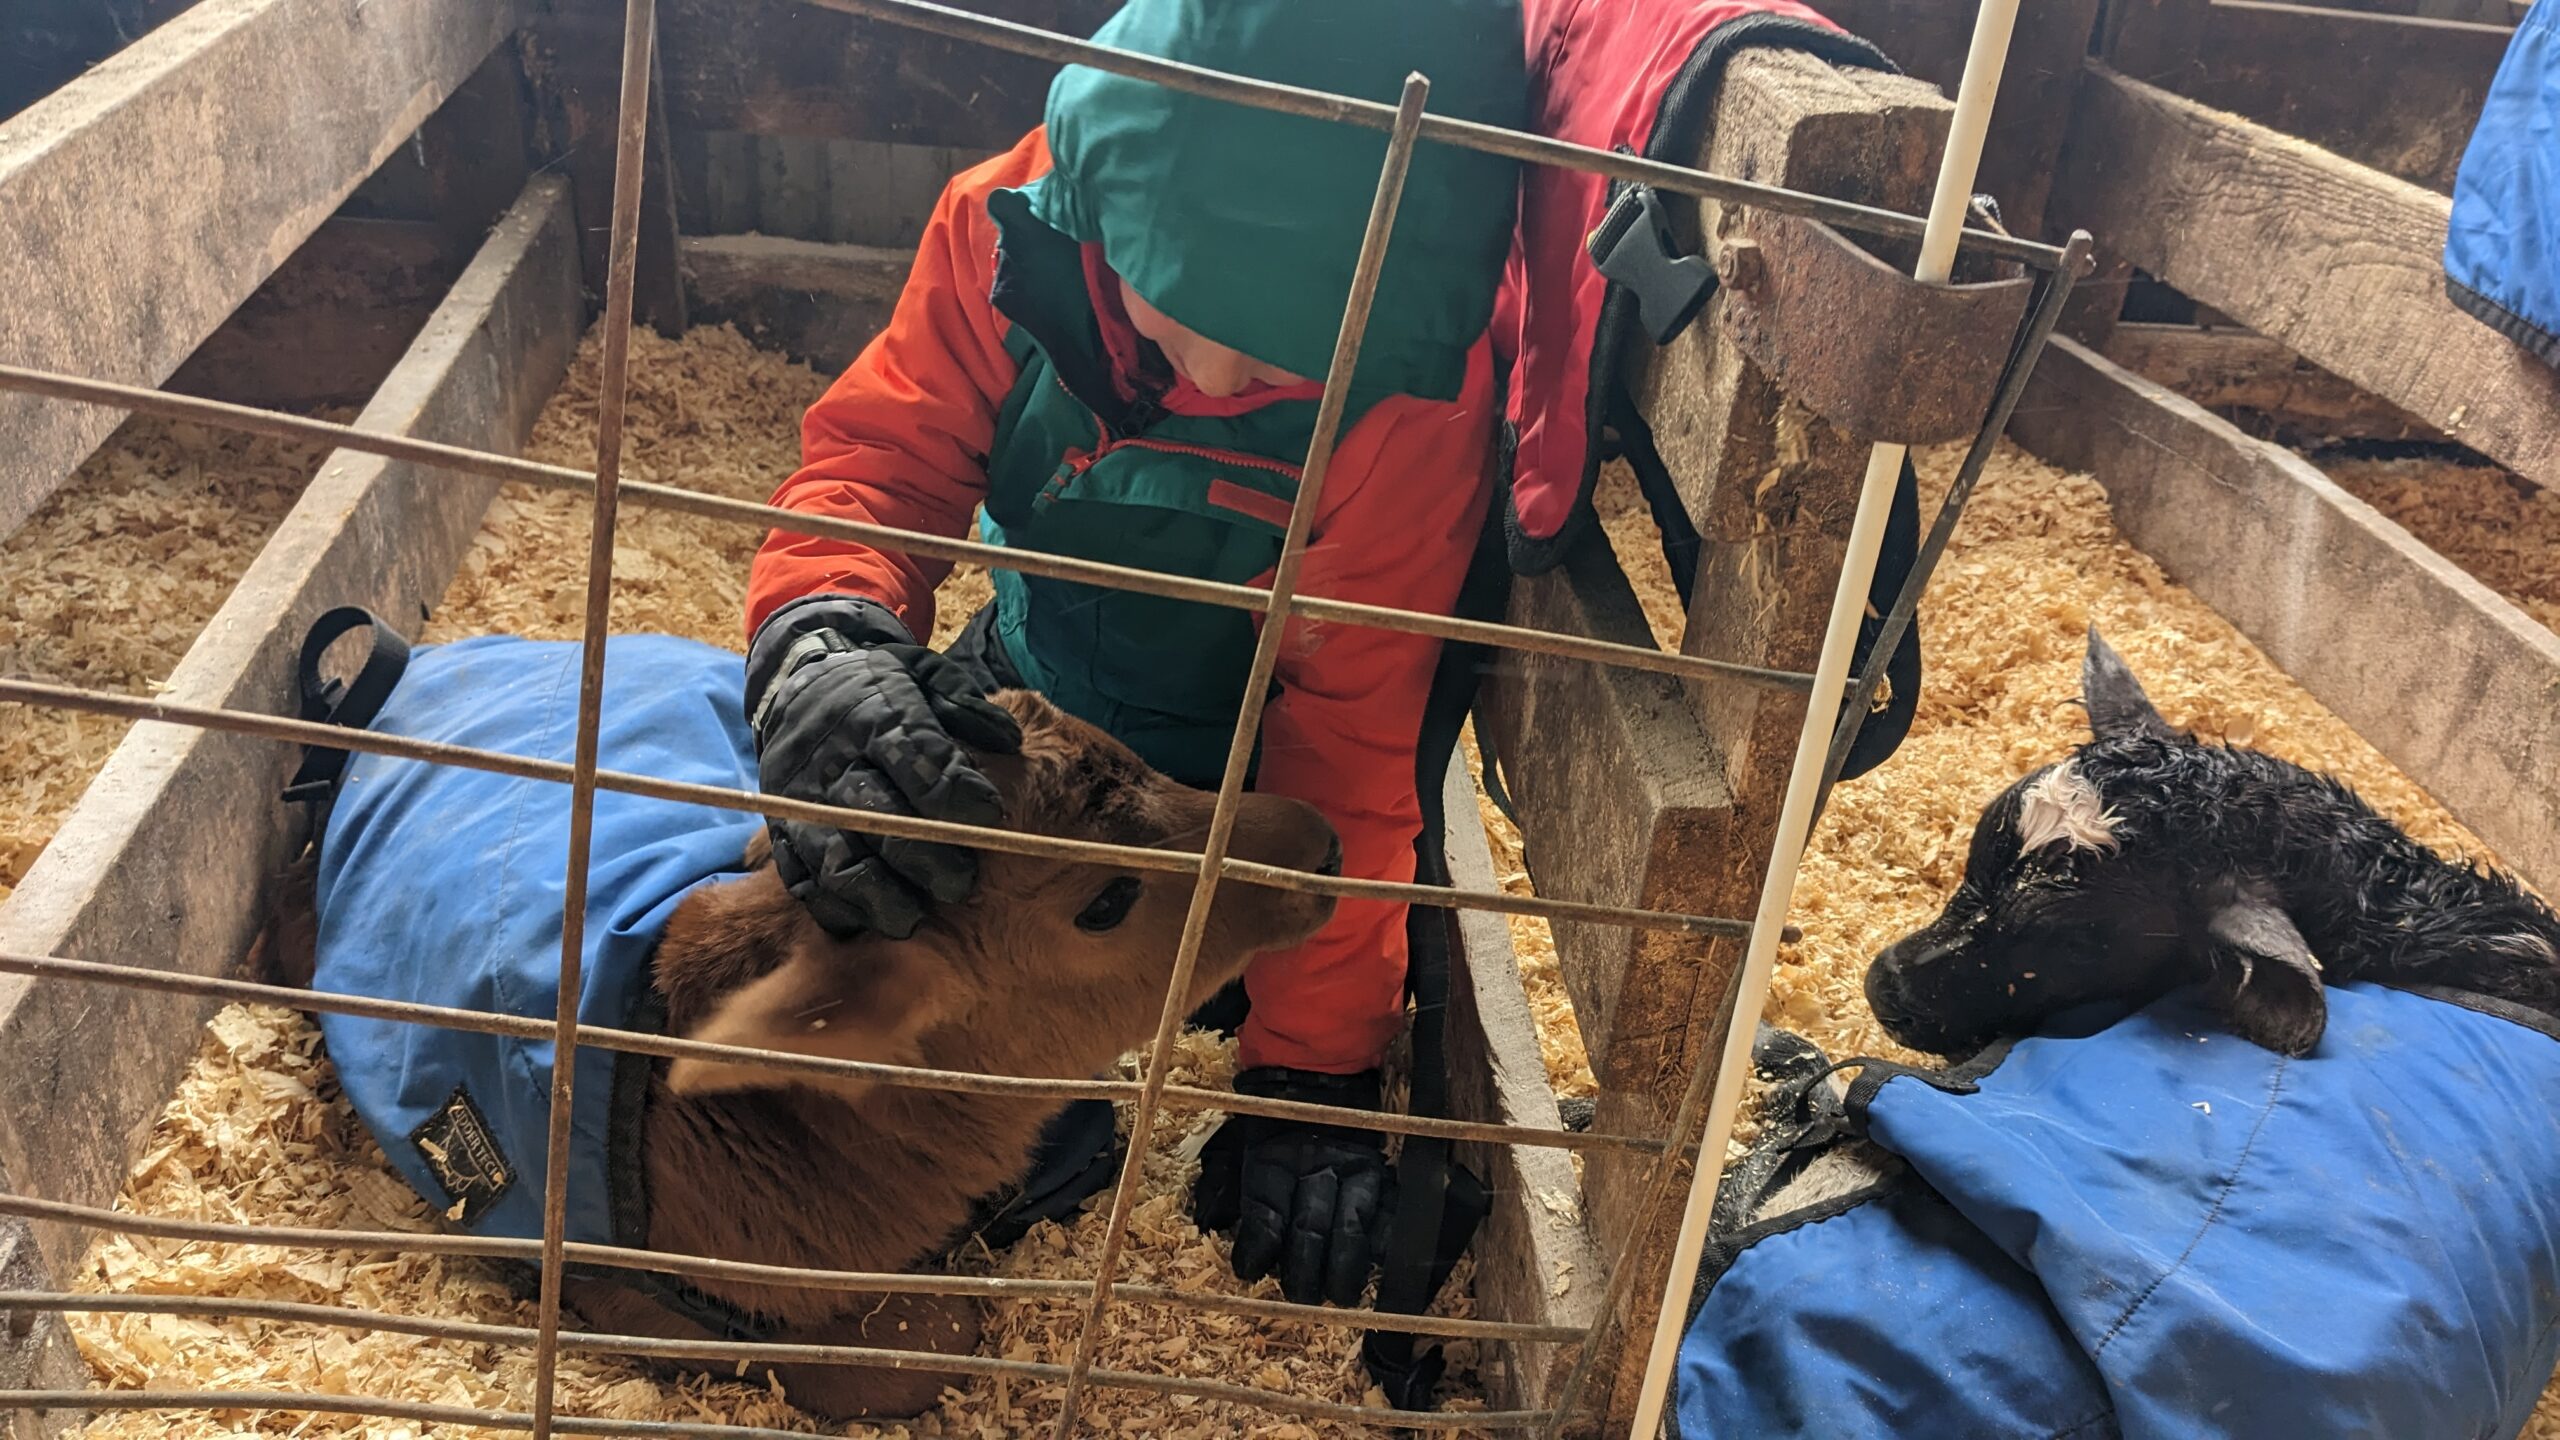 A young child in brightly colored winter gear kneels and pets a newborn calf wearing a bright blue jacket inside a pen, while another calf rests in the next pen.